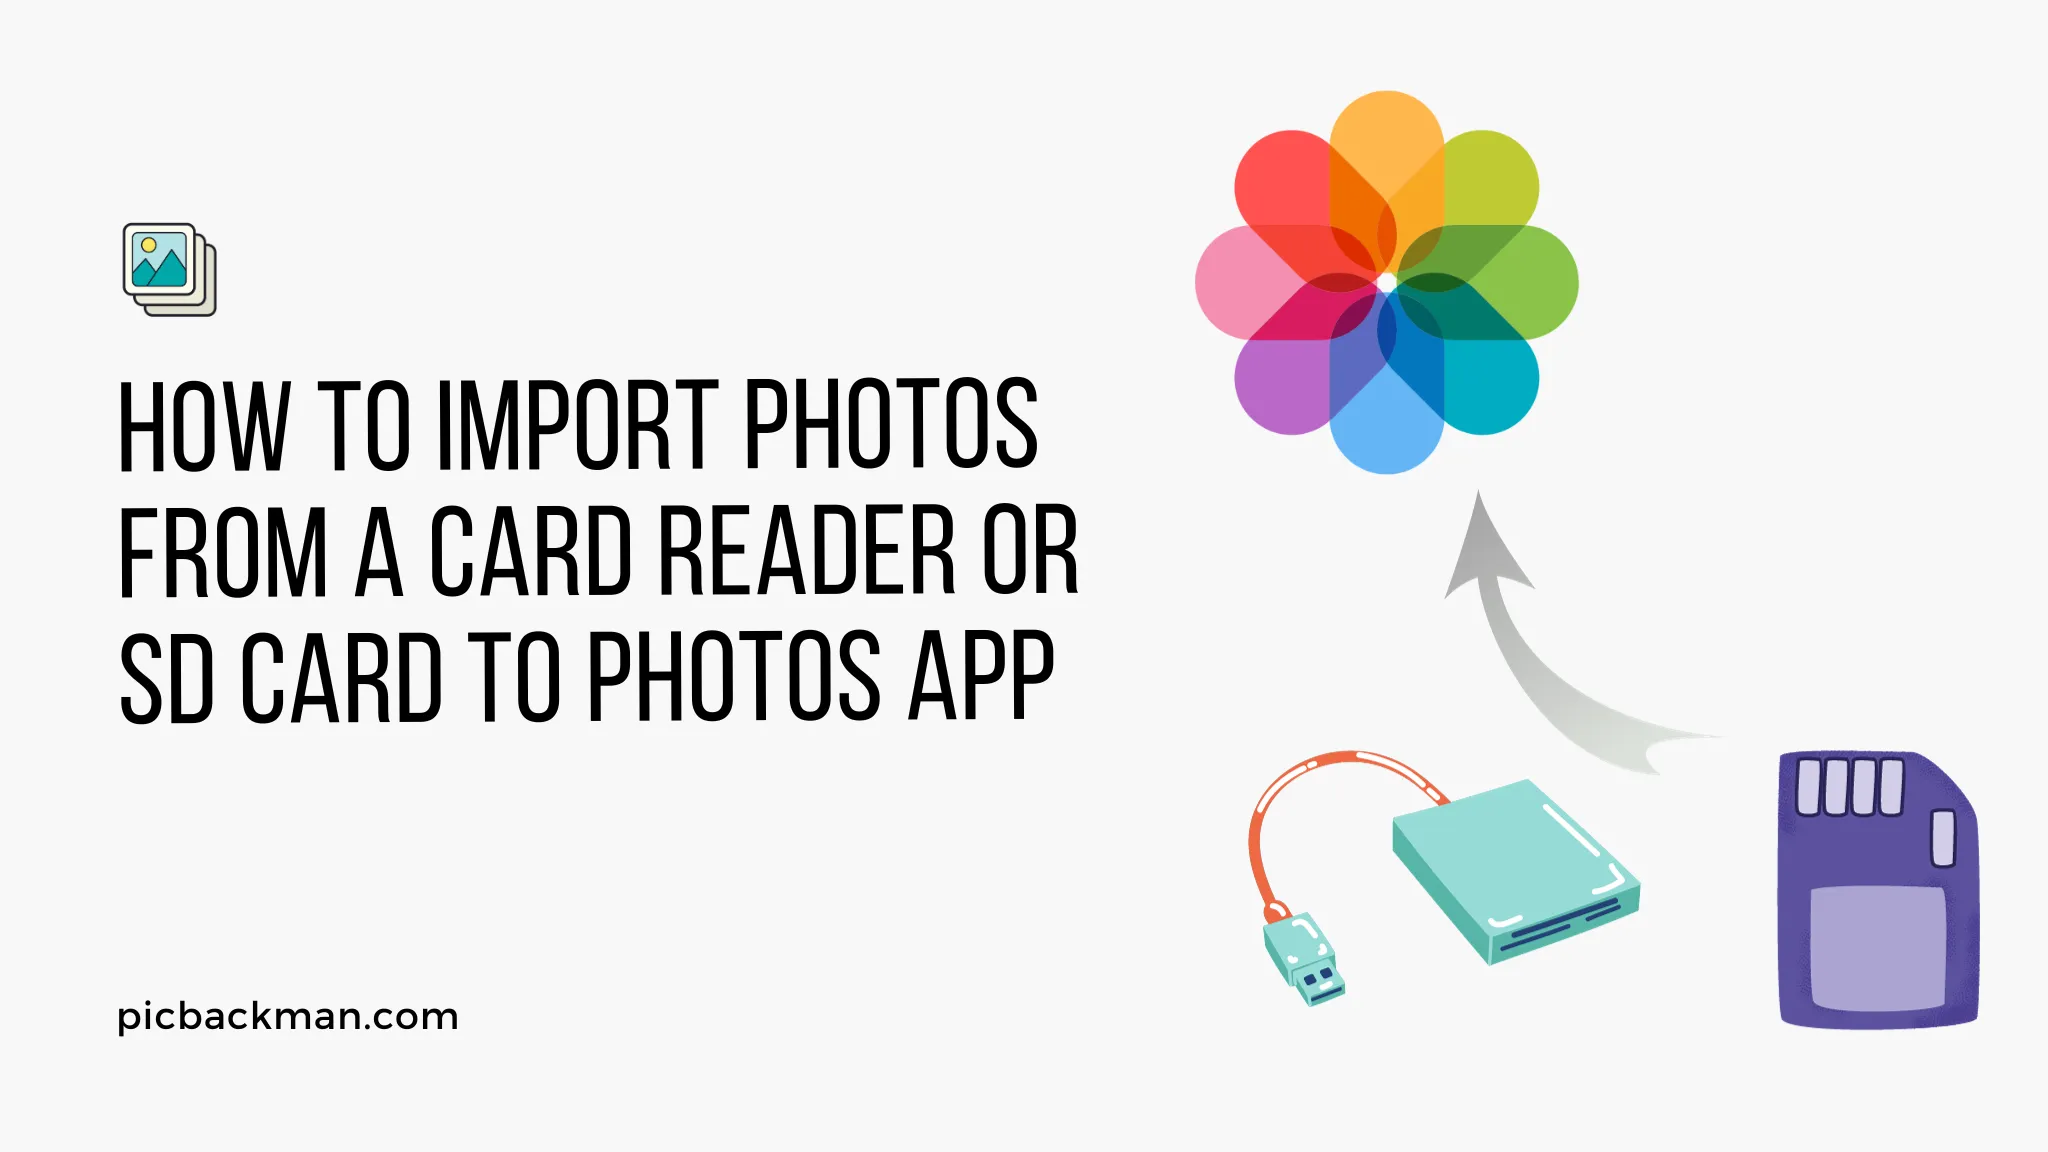 How to Import Photos from a Card Reader or SD Card to Photos App